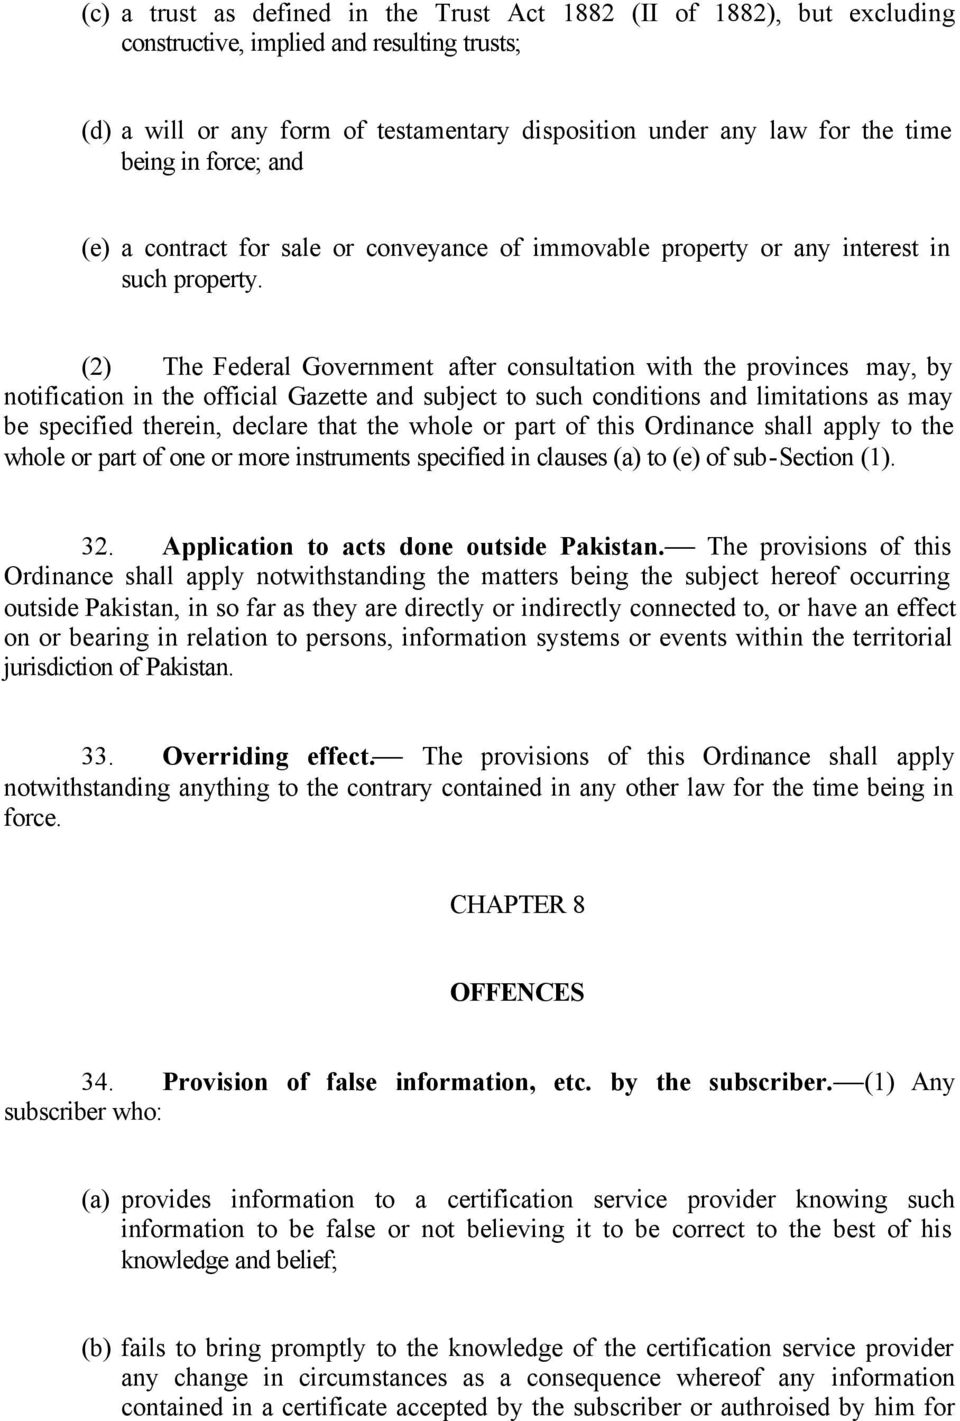 (2) The Federal Government after consultation with the provinces may, by notification in the official Gazette and subject to such conditions and limitations as may be specified therein, declare that